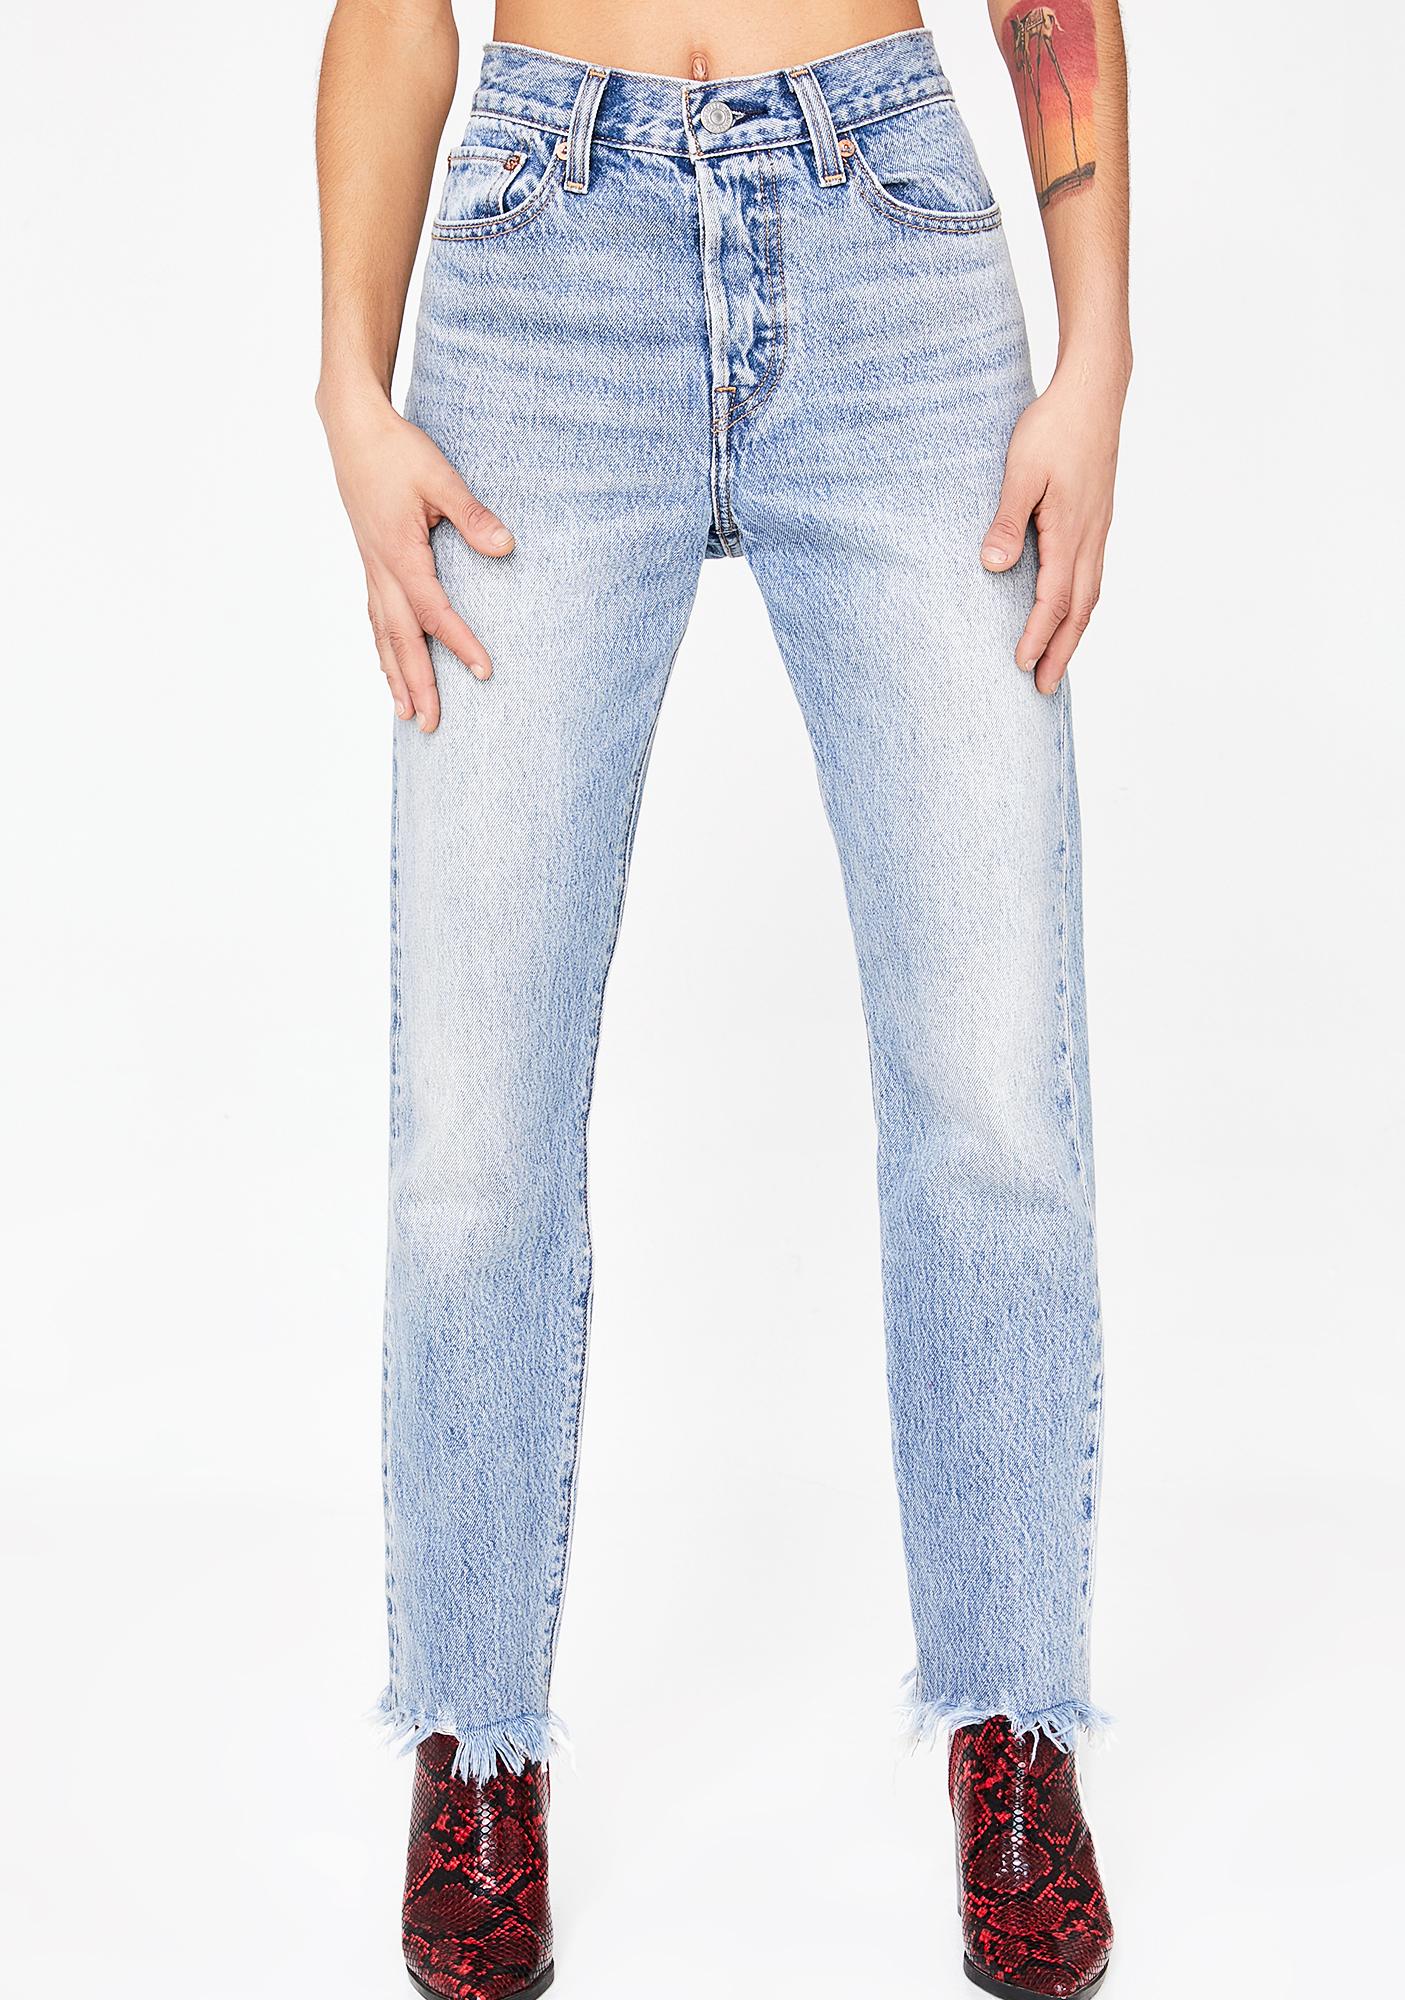 wedgie fit light wash high rise jeans